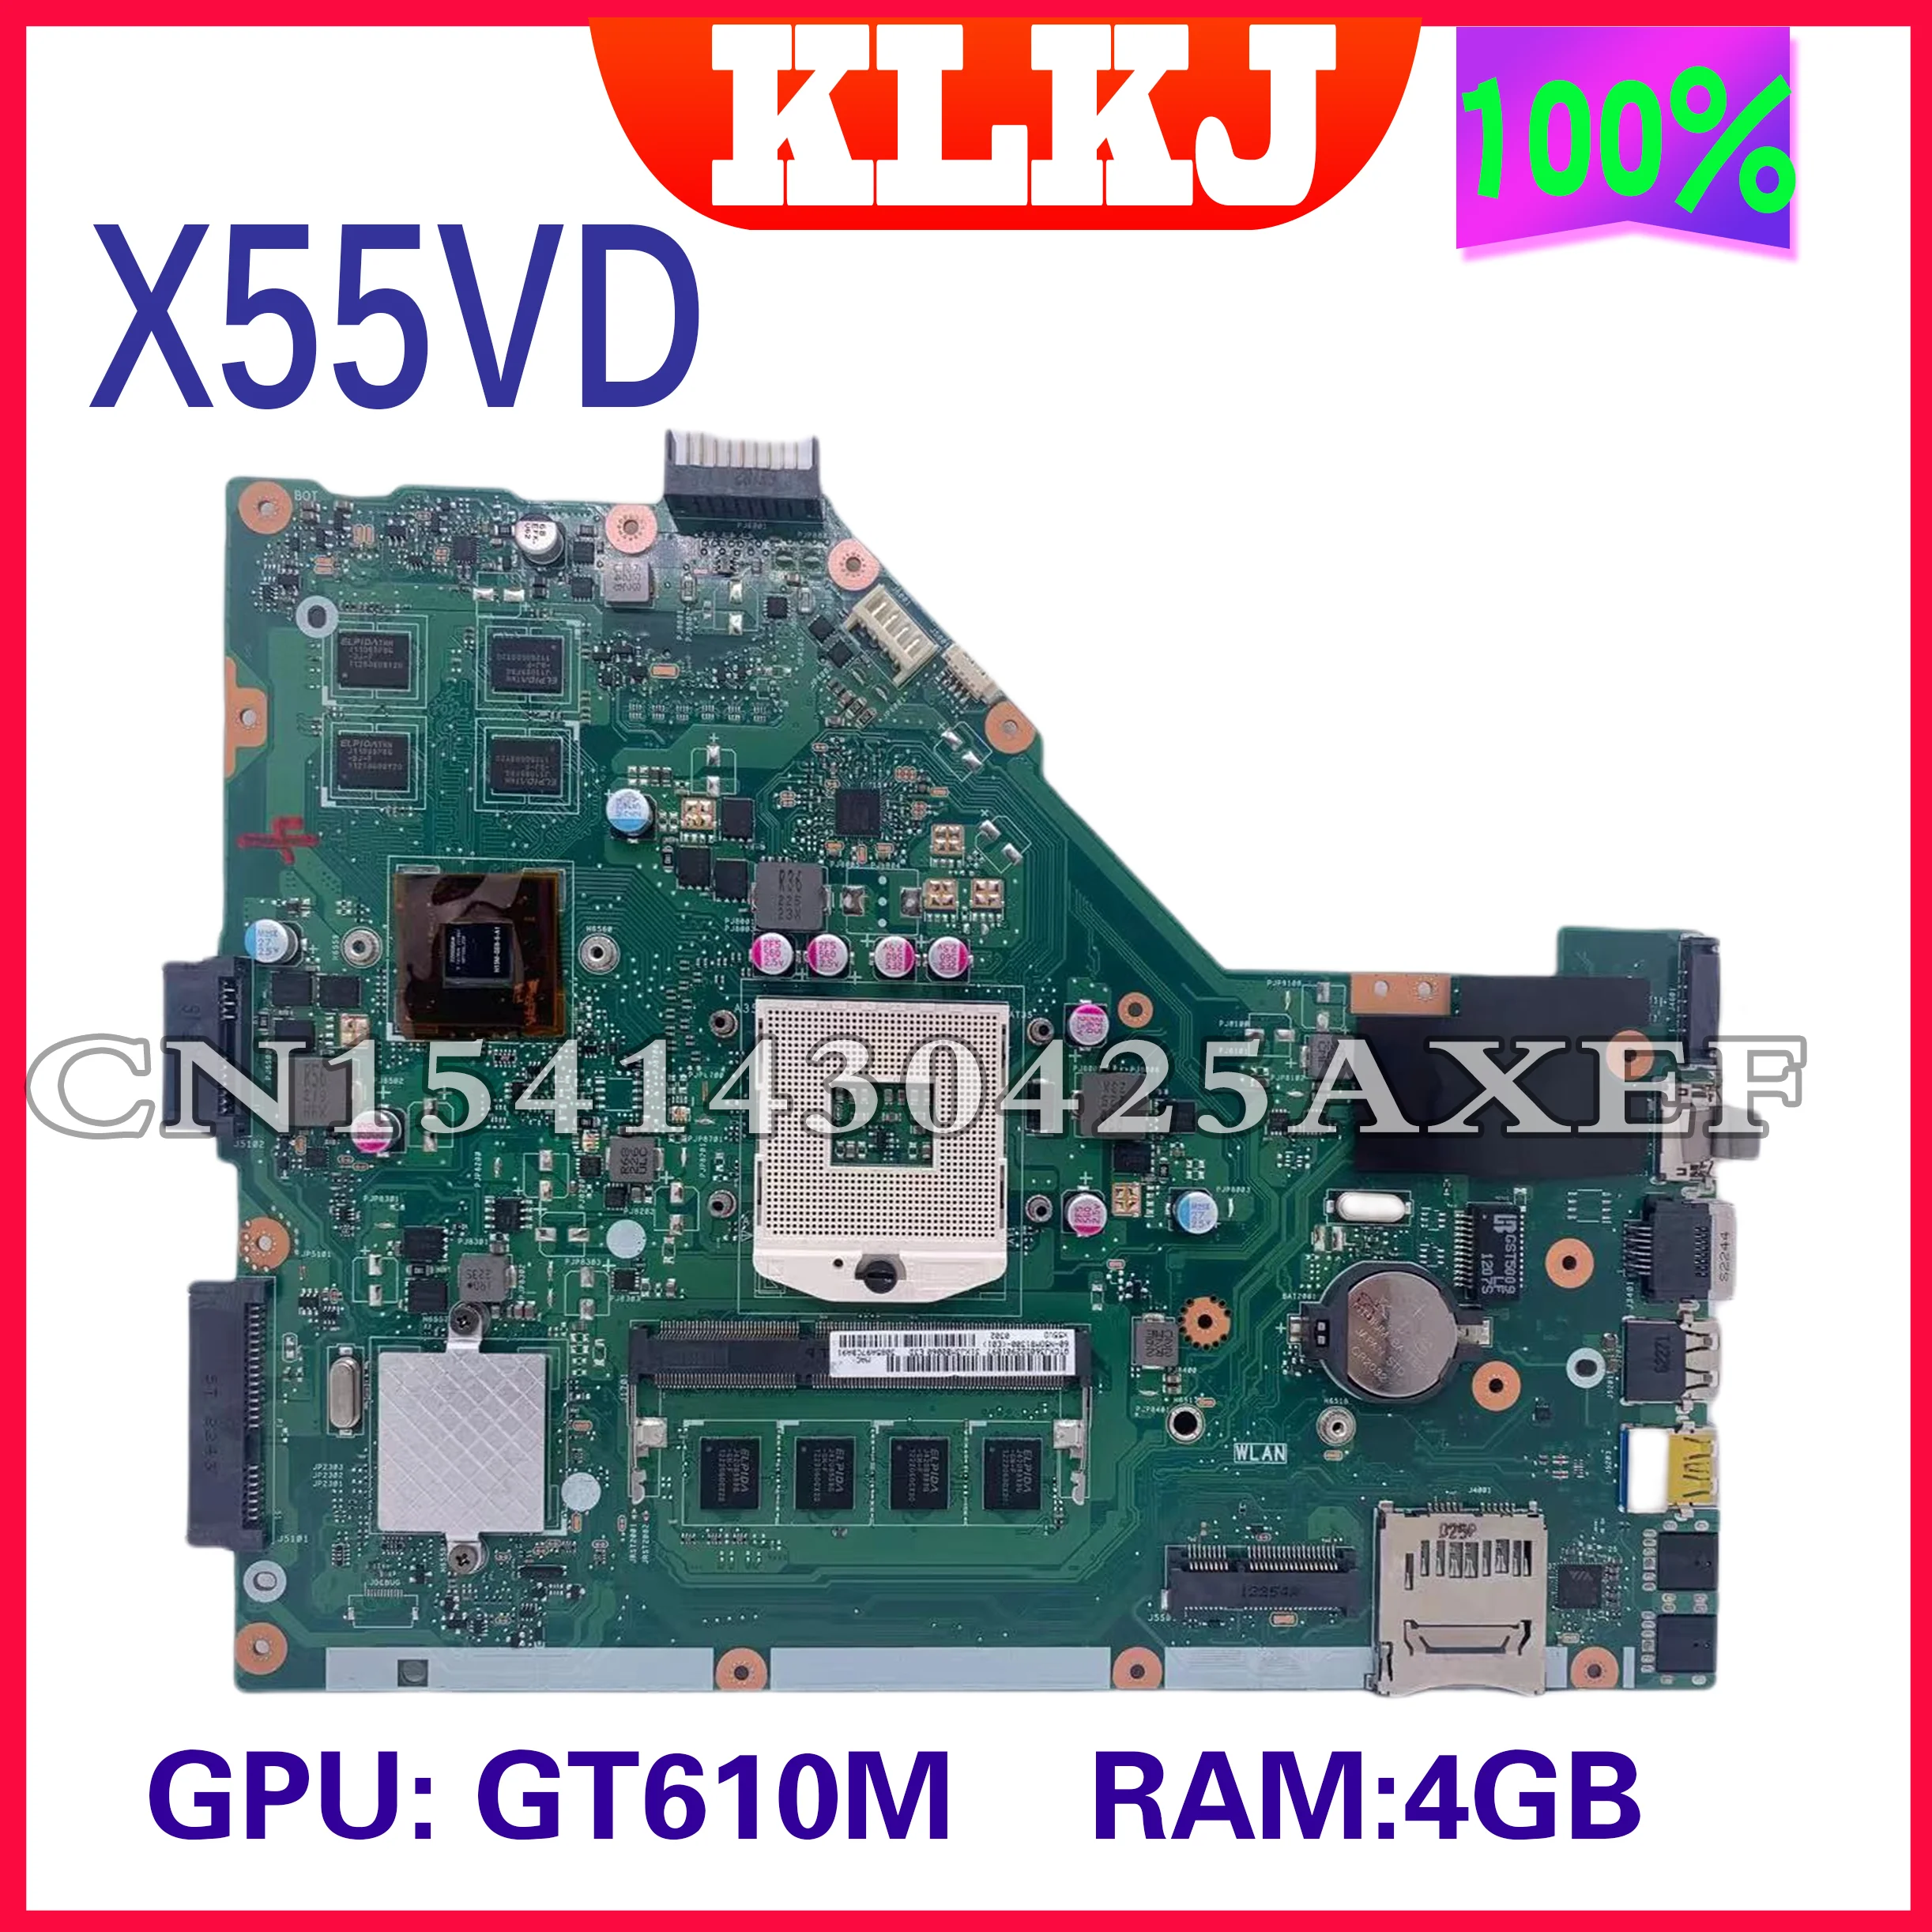 

X55VD Orgnial Mainboard For ASUS X55VD X55V X55CR Laptop Motherboard With I3-2350M/2370M GT610M 4GB/2GB-RAM 100% Fully Test OK